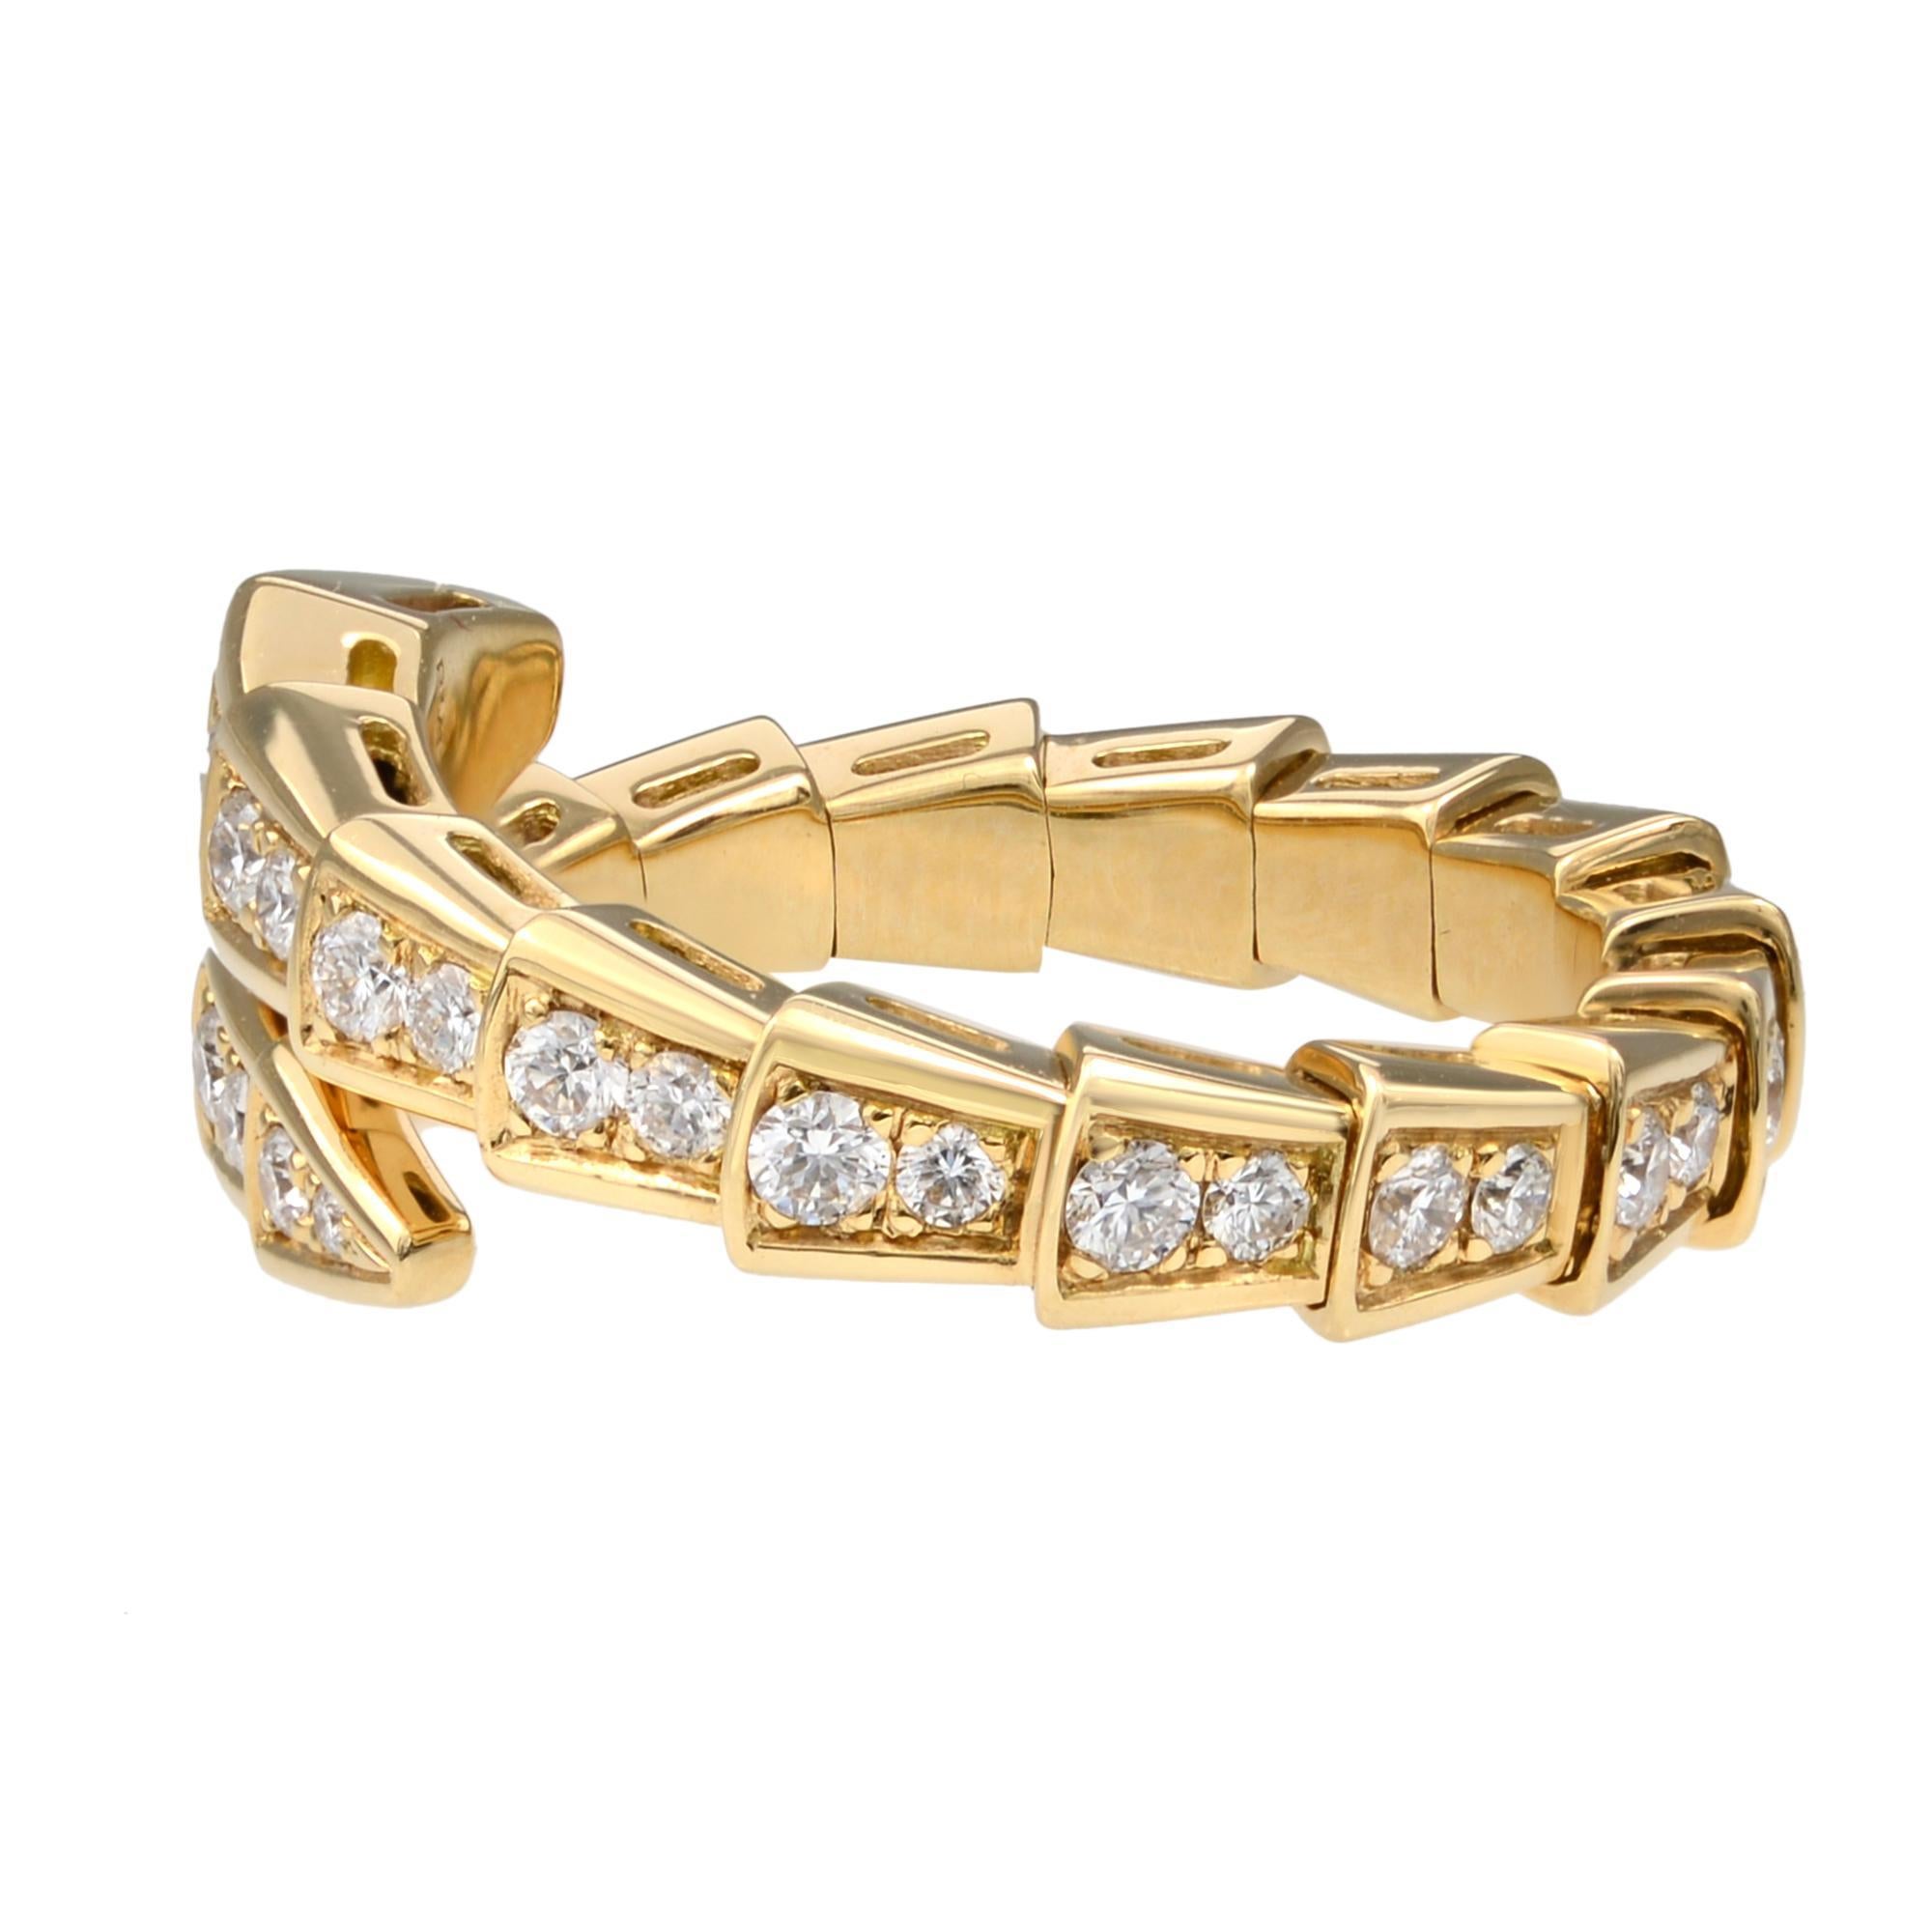 Bvlgari Serpenti Viper Round Cut Diamond Ring. This beautiful jewelry piece coils around the finger and stands out thanks to the precious beauty of the scales and the distinctive sinuosity of the snake. The ring is crafted in 18K yellow gold with